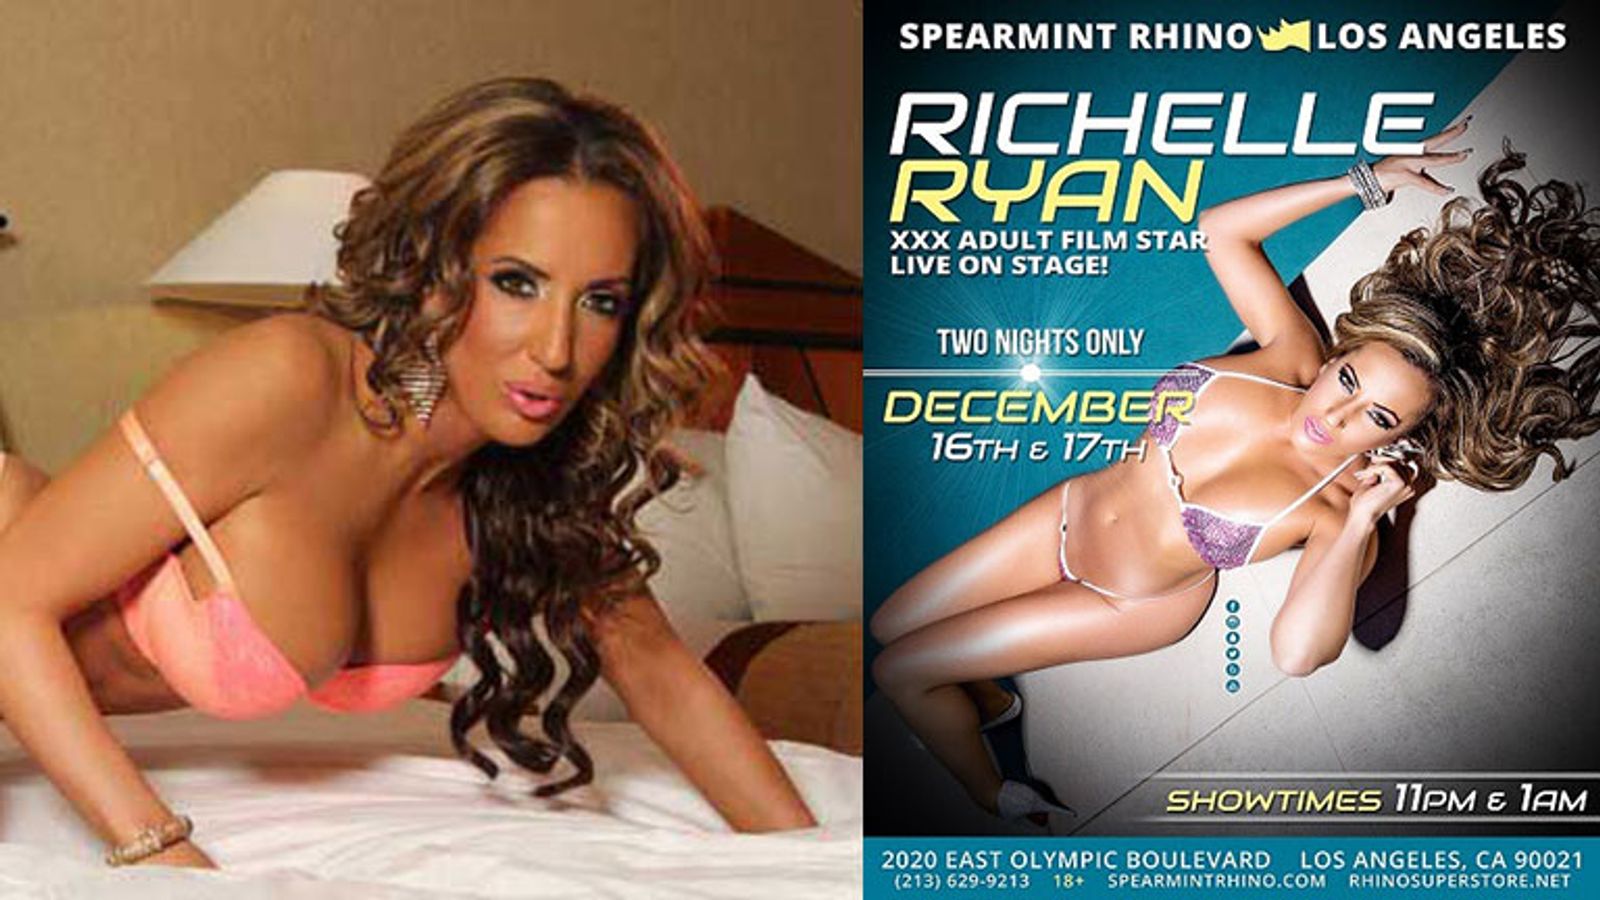 Richelle Ryan's at Spearmint Rhino in Los Angeles This Weekend